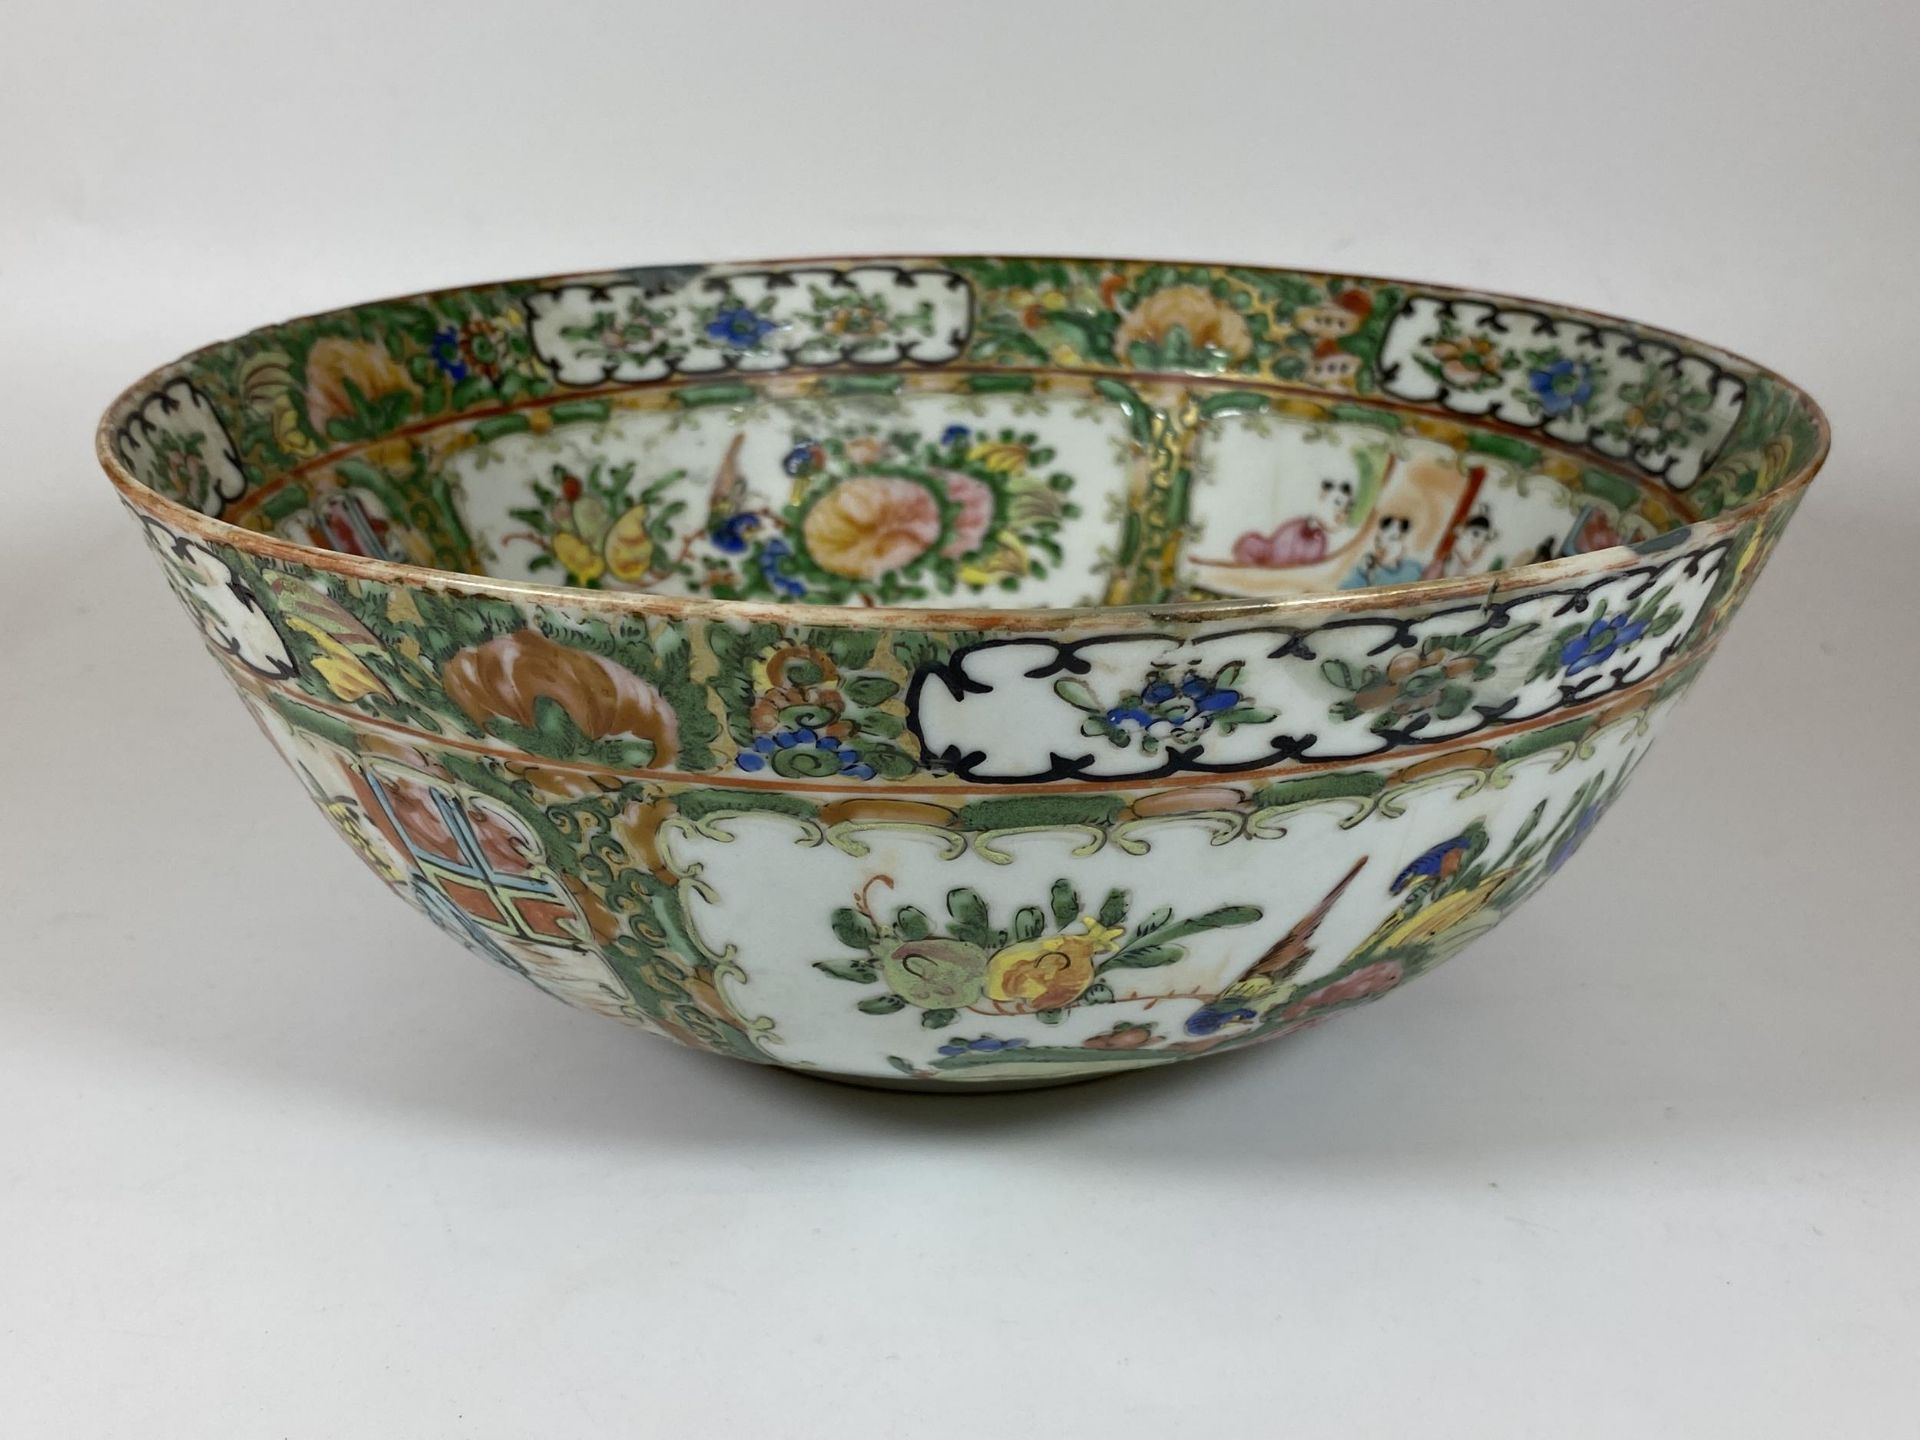 A 19TH CENTURY CHINESE CANTON FAMILLE ROSE MEDALLION FRUIT BOWL, DIAMETER 26CM, HEIGHT 10CM - Image 5 of 9